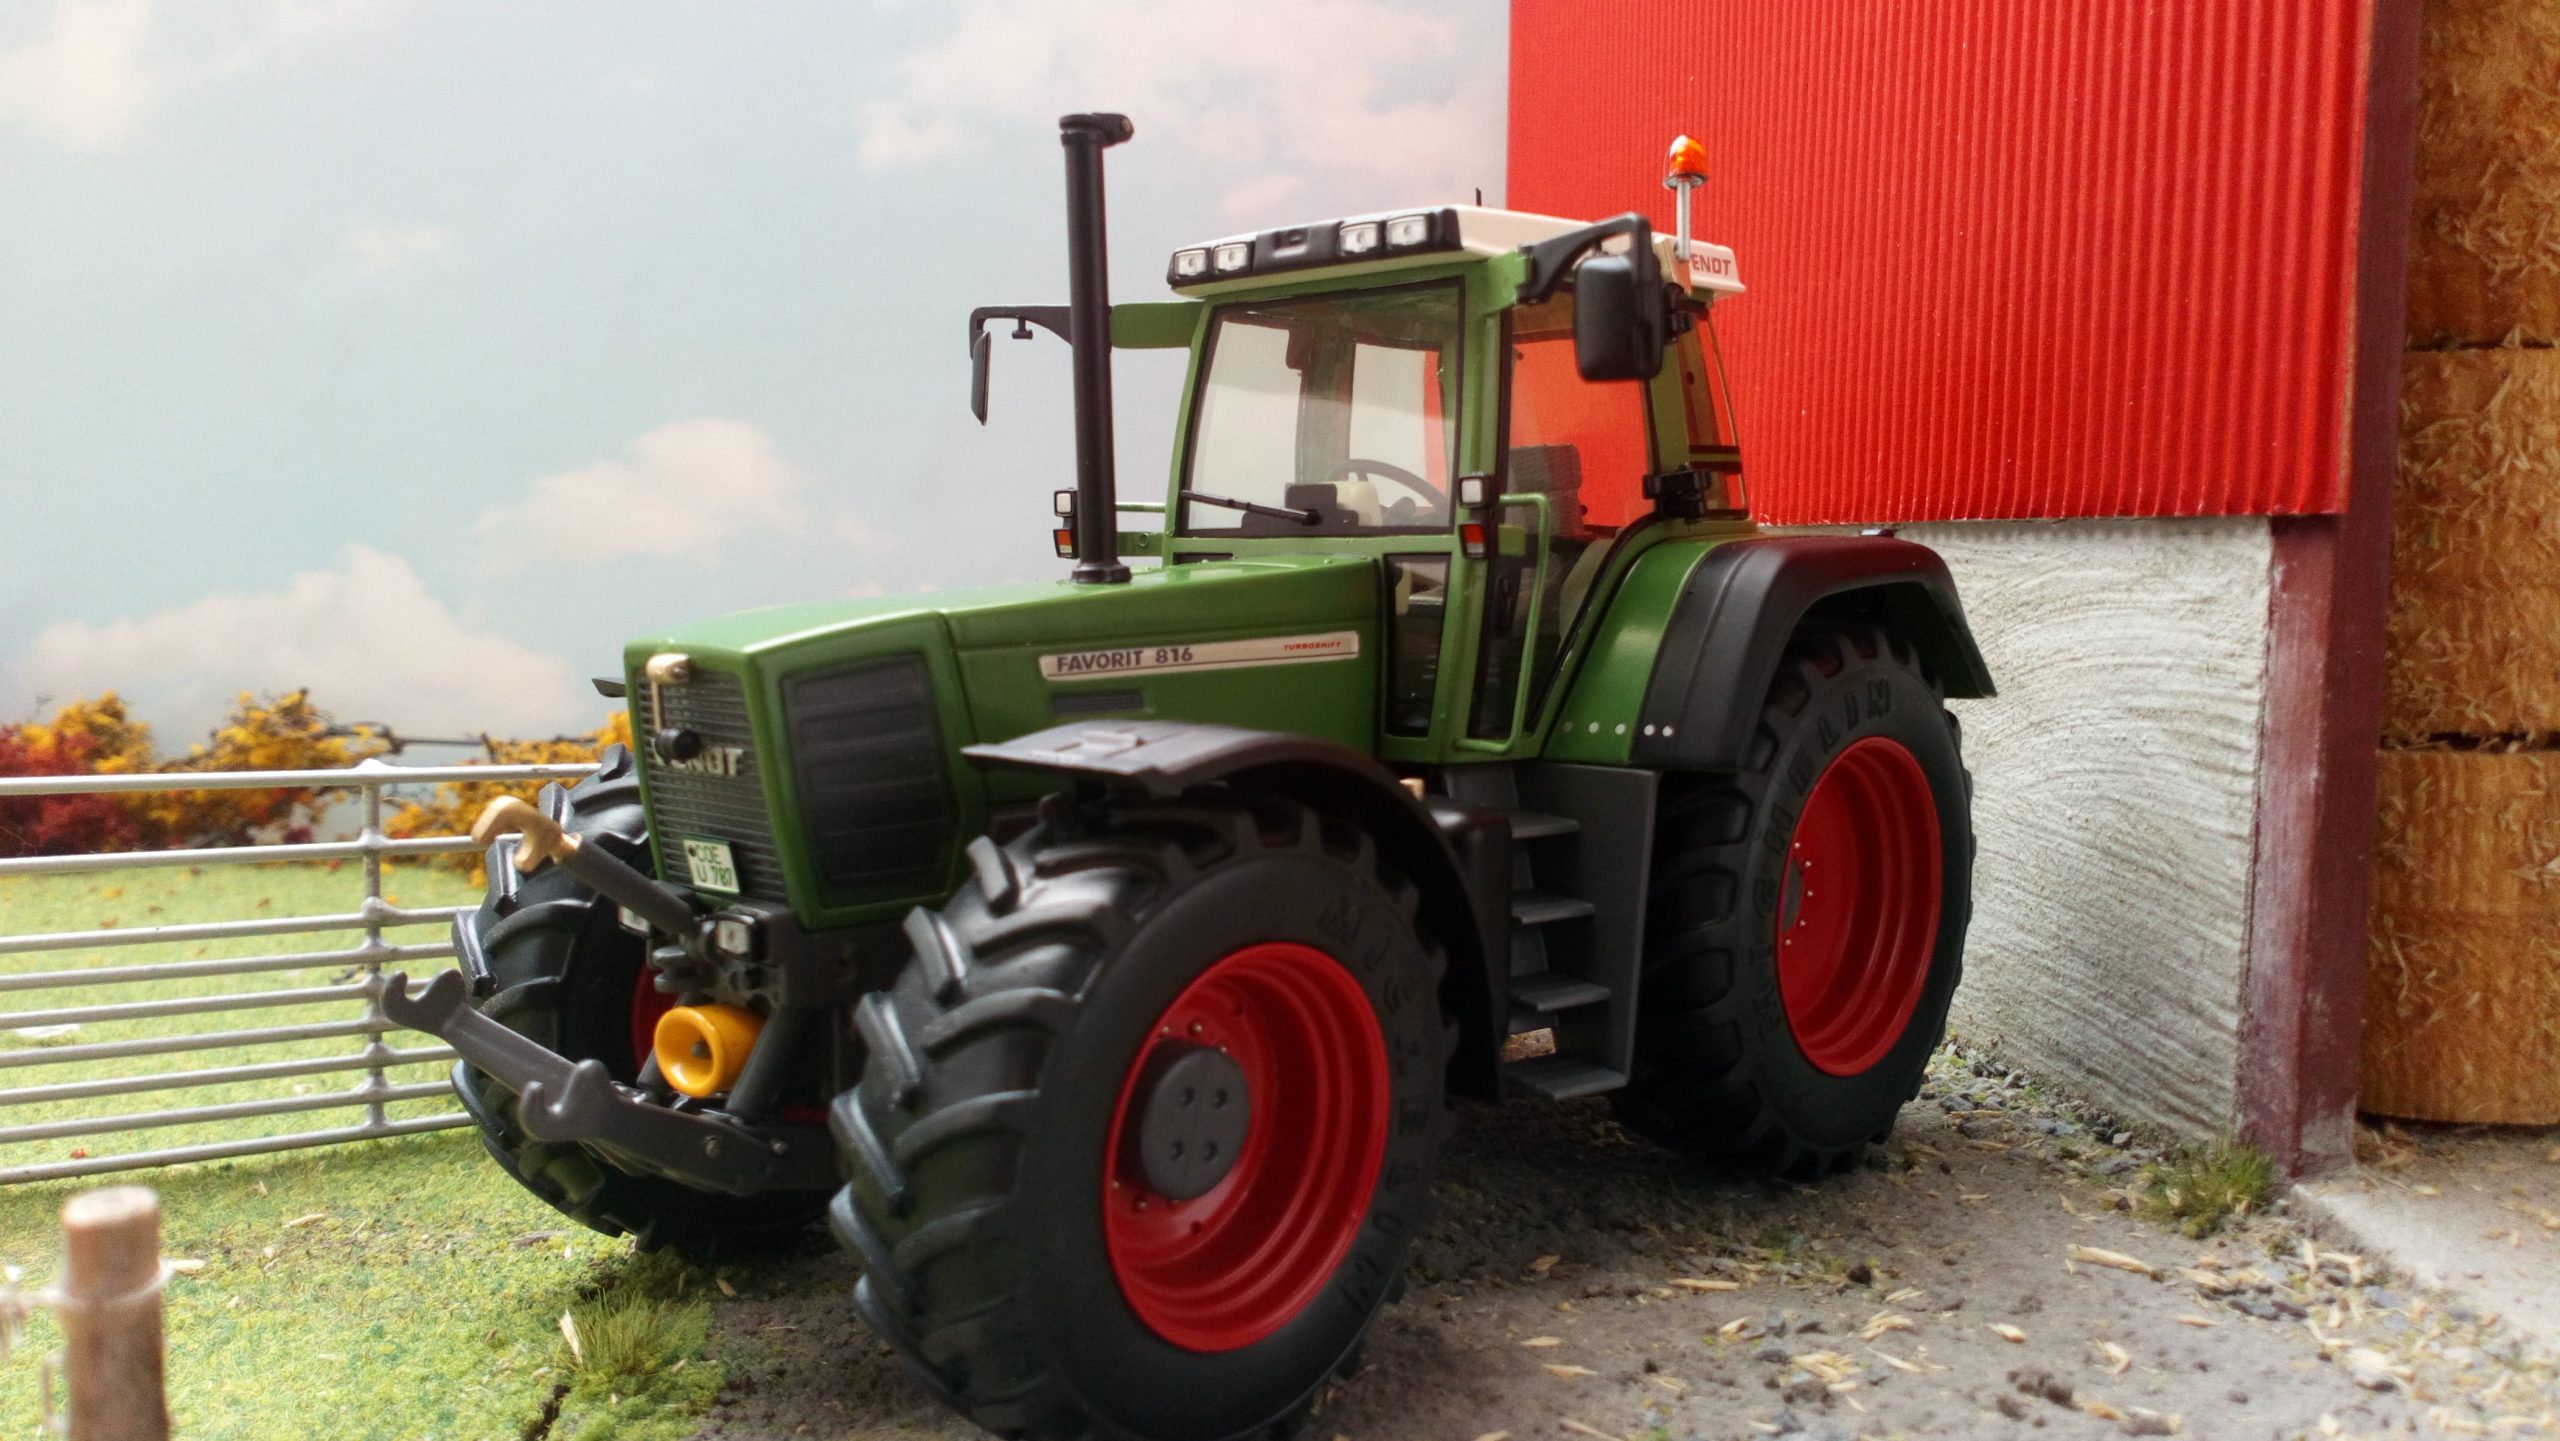 Collectable Weise-Toys Fendt Favorit 514C Model Tractor 1:32 Scale 14 